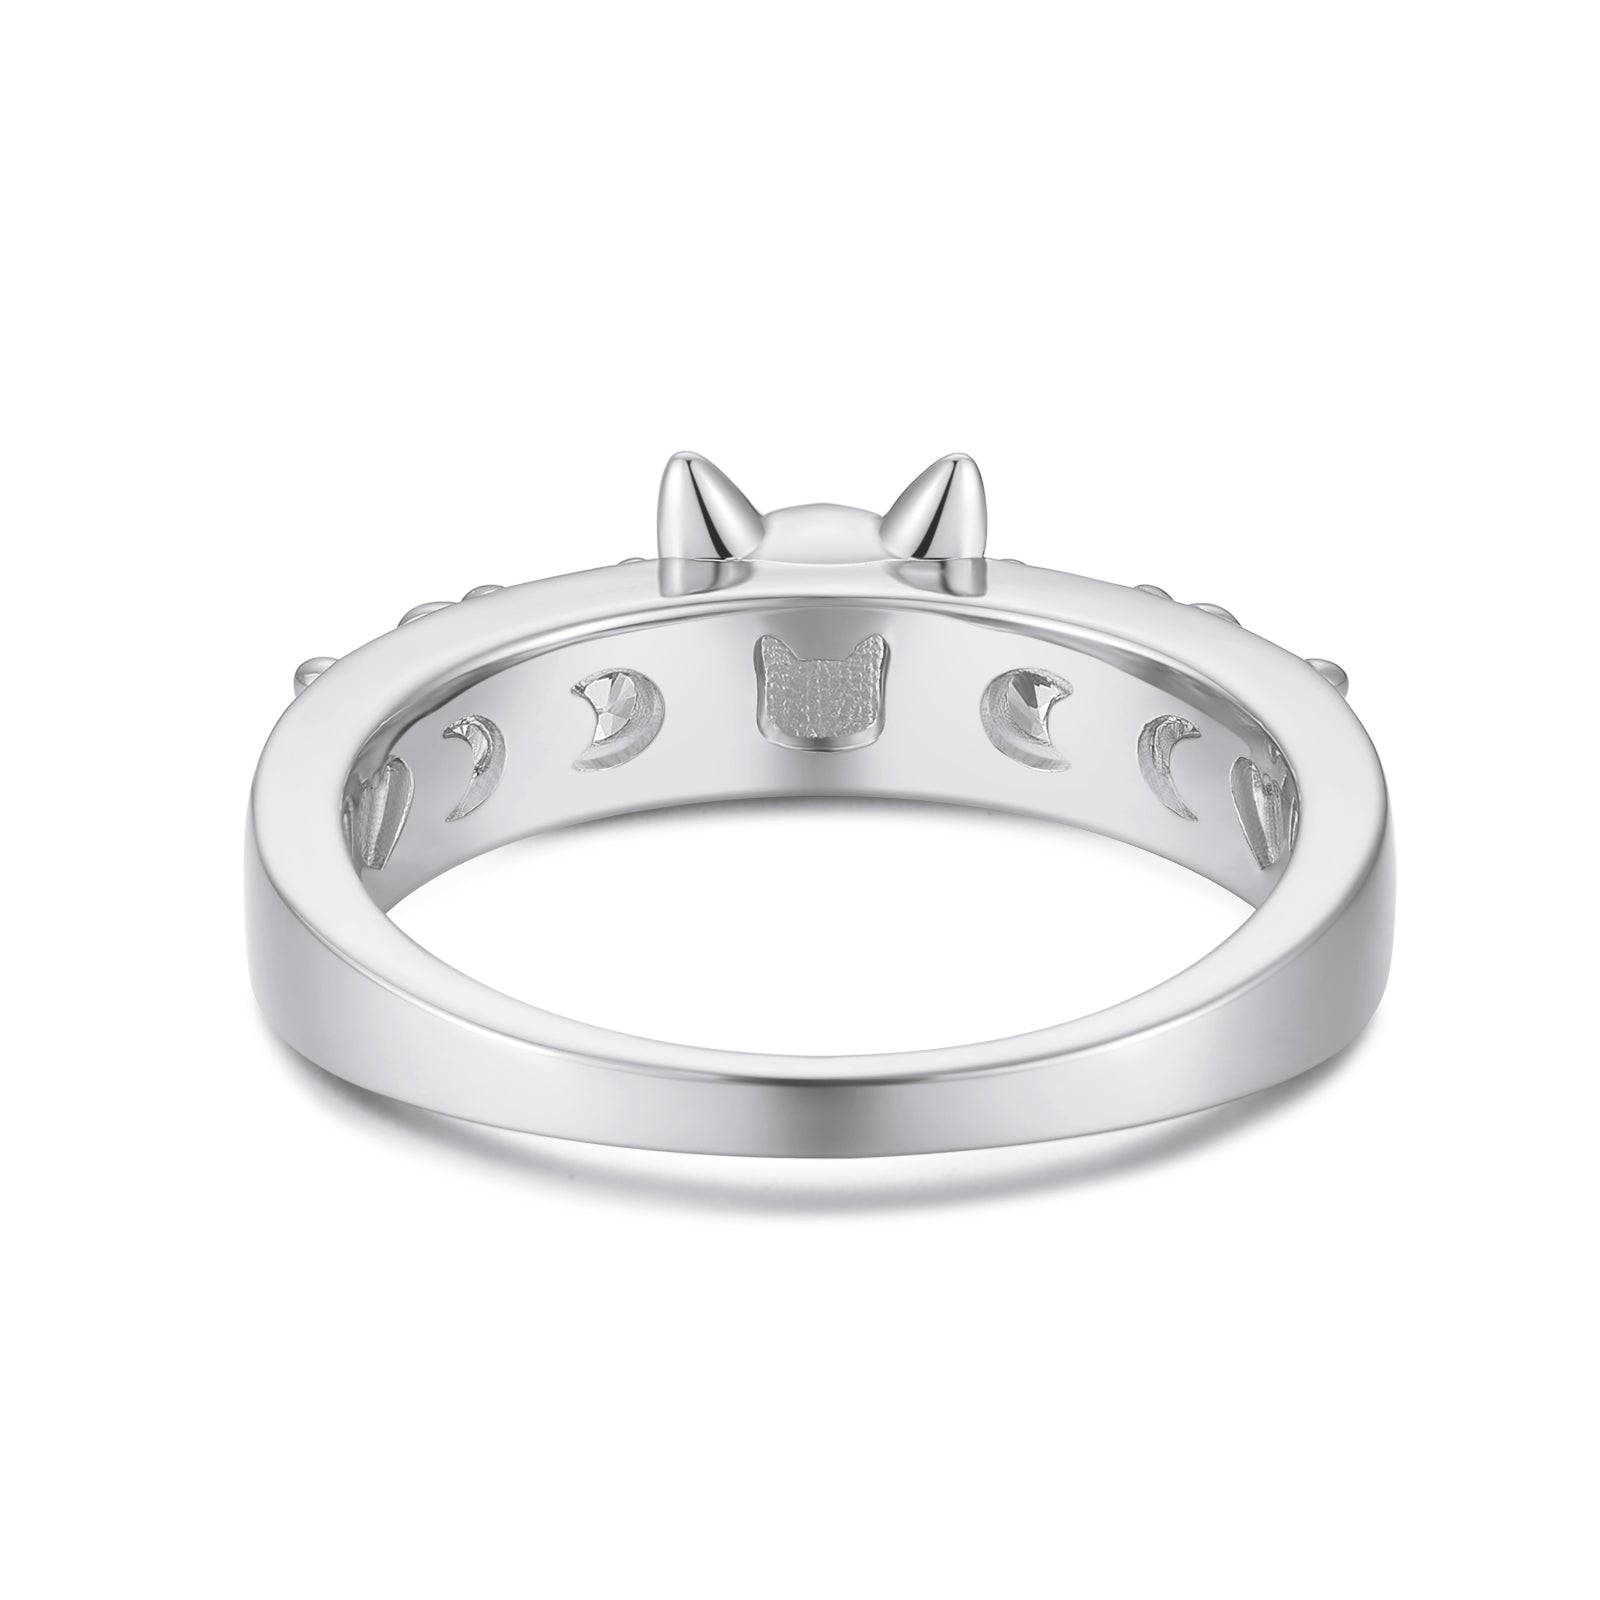 Cynthia x Love by the Moon - CZ Silver Cat Ring